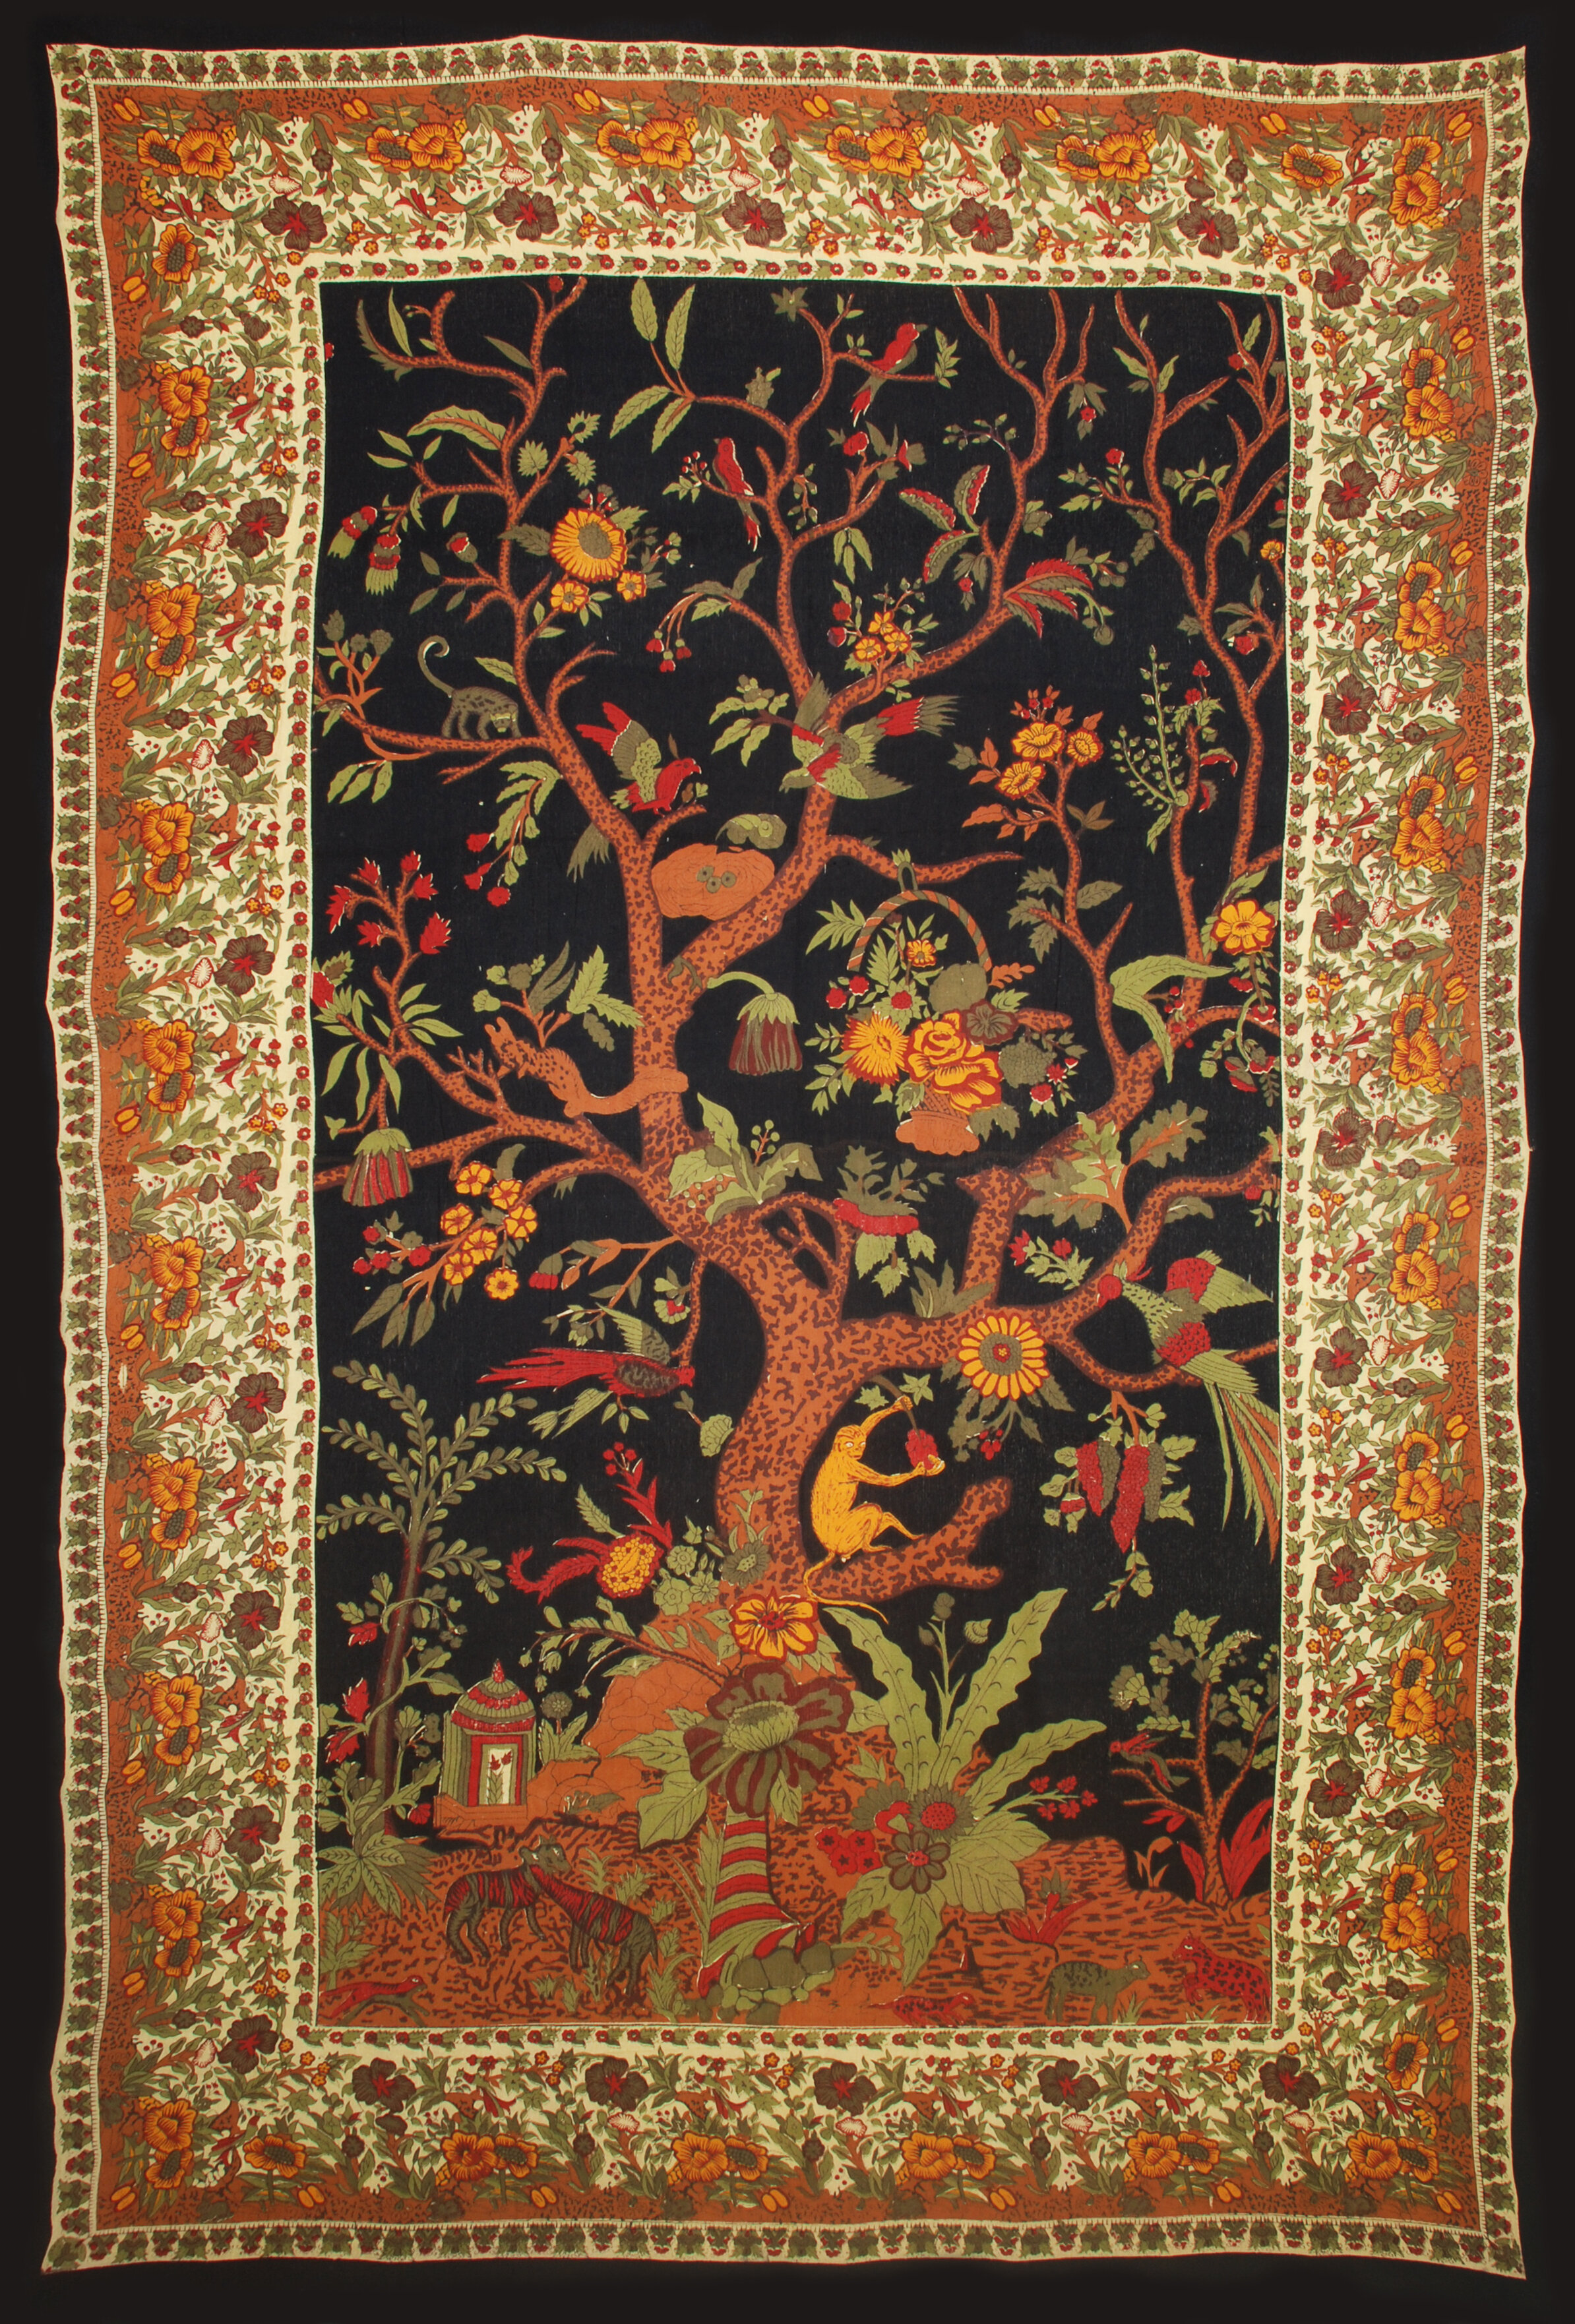 NEW Tree of Life Tapestry Wall Hang Many Uses Gorgeous FREE SHIPPING